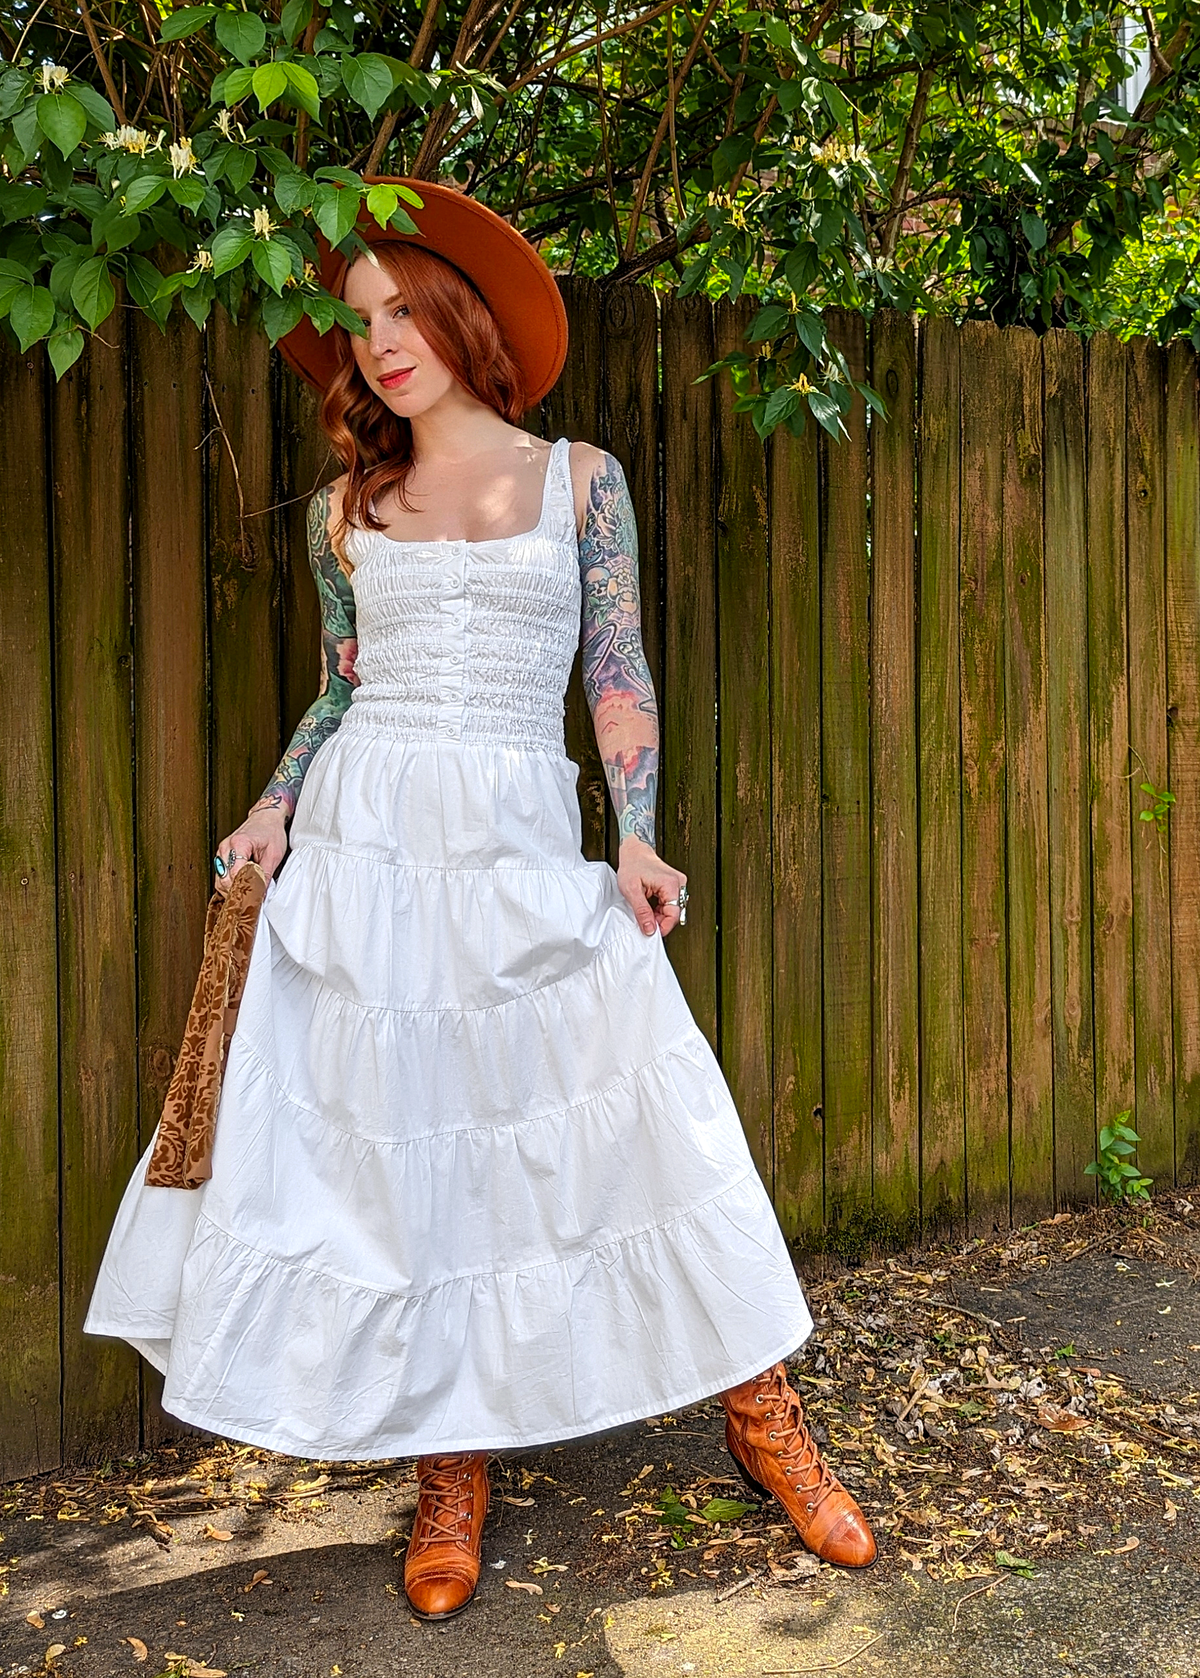 70s inspired dreamy prairie crisp white cotton smocked midi sundress with button front and tiered skirt by Motel Rocks